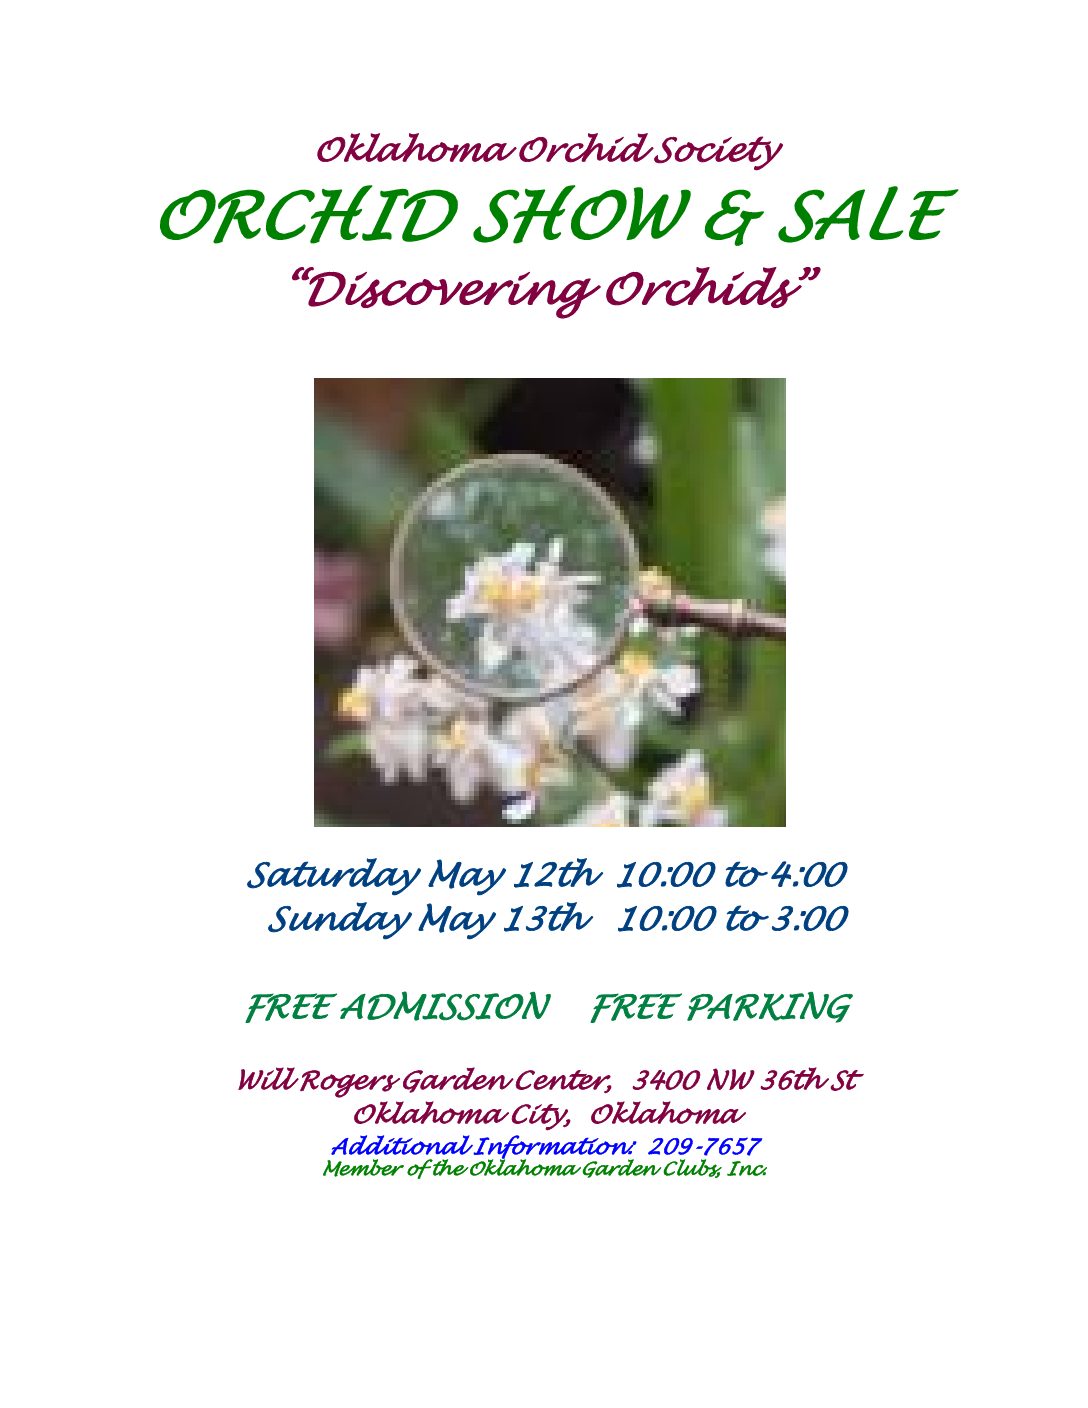 66th annual New Orleans Orchid Society Show and Sale